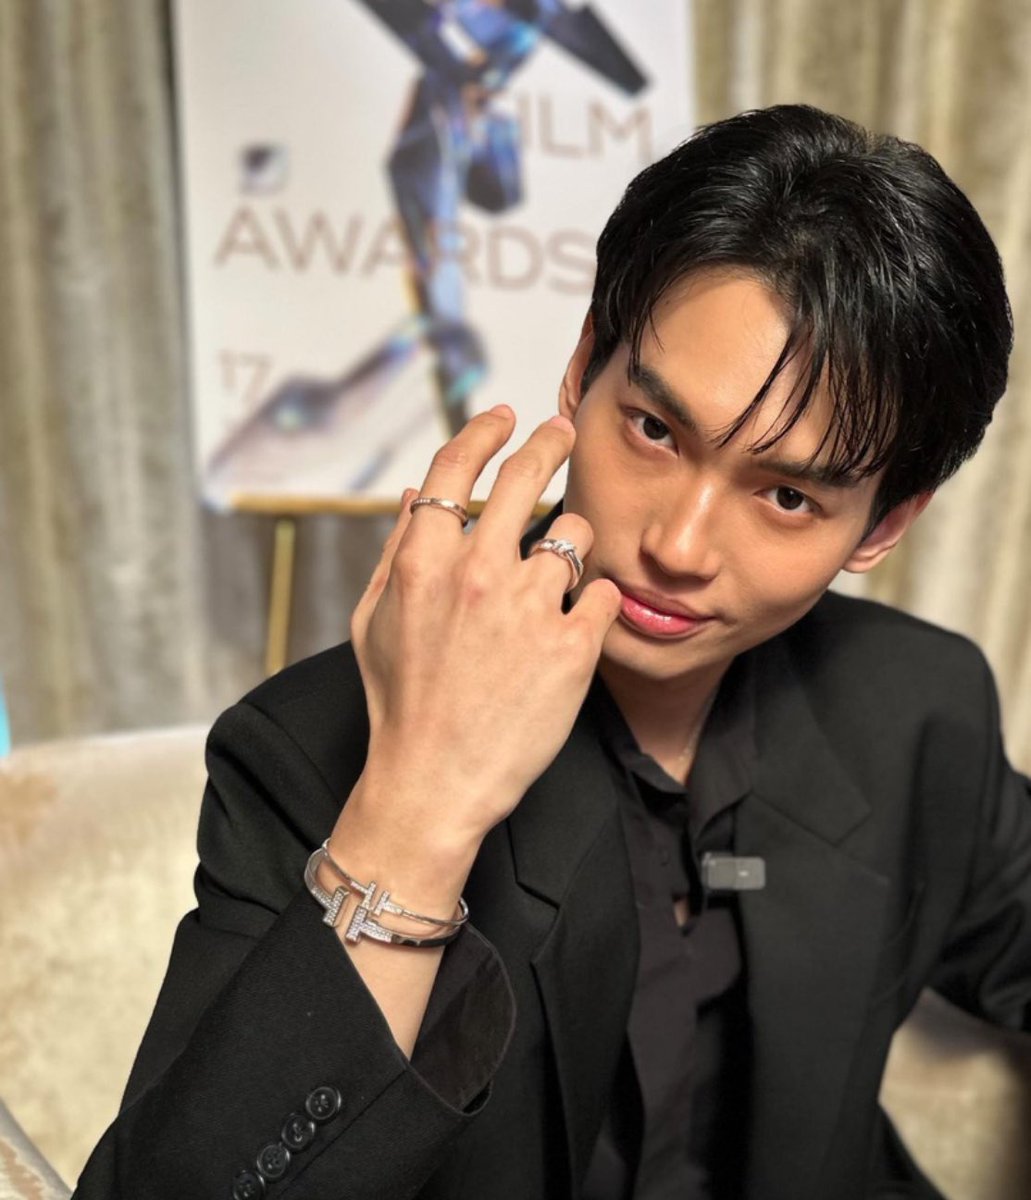 Mr.Tiffany Win Metawin 😳🫠✨✨🔥 @TiffanyAndCo House Ambassador showing with his luxury jewellery 🤩🔥 Best HA promote well as much as he can 🤩 #TiffanyandCo great choice 👏🏻 WIN FIRST PREMIERE #UPSWorldPremiereAtAFA #UnderParallelSkies #winmetawin